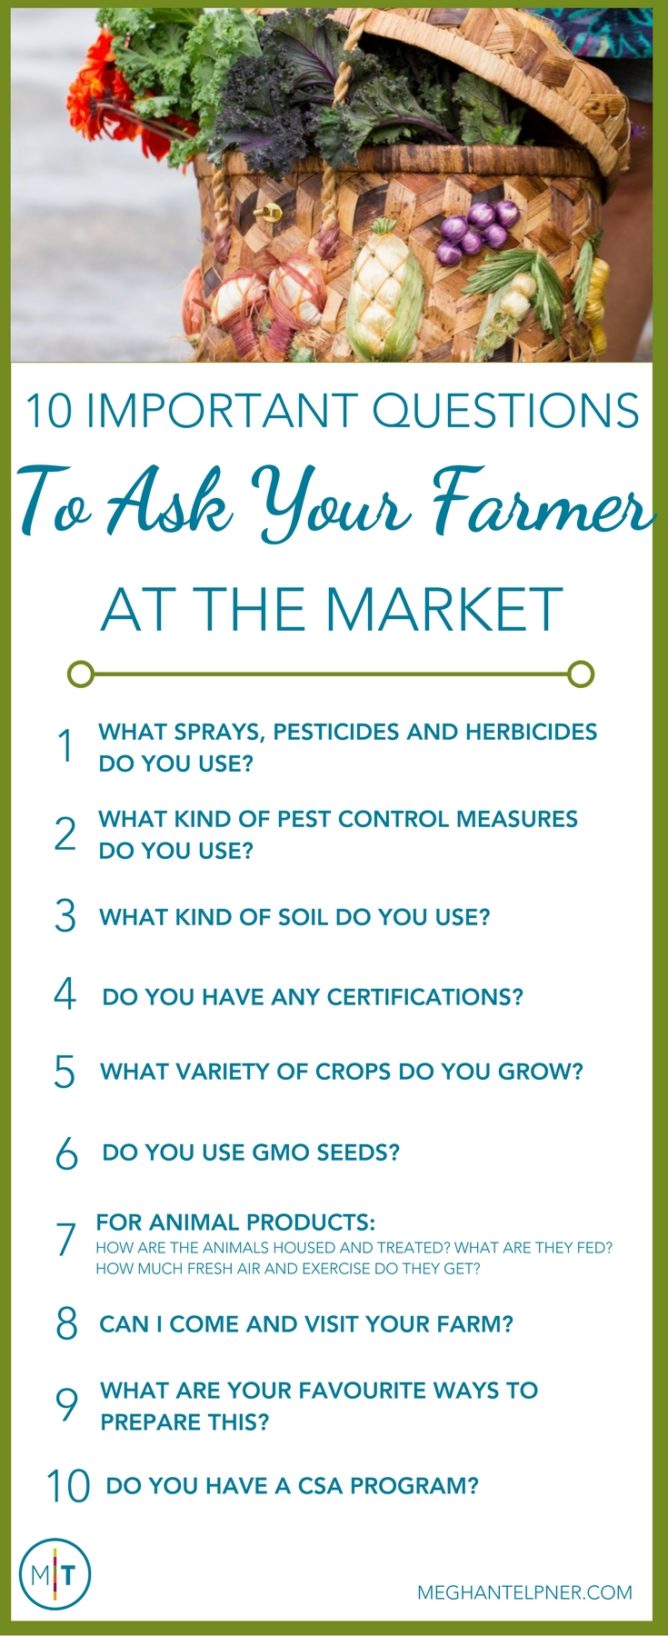 Ten Things To Ask Your Farmer At The Market